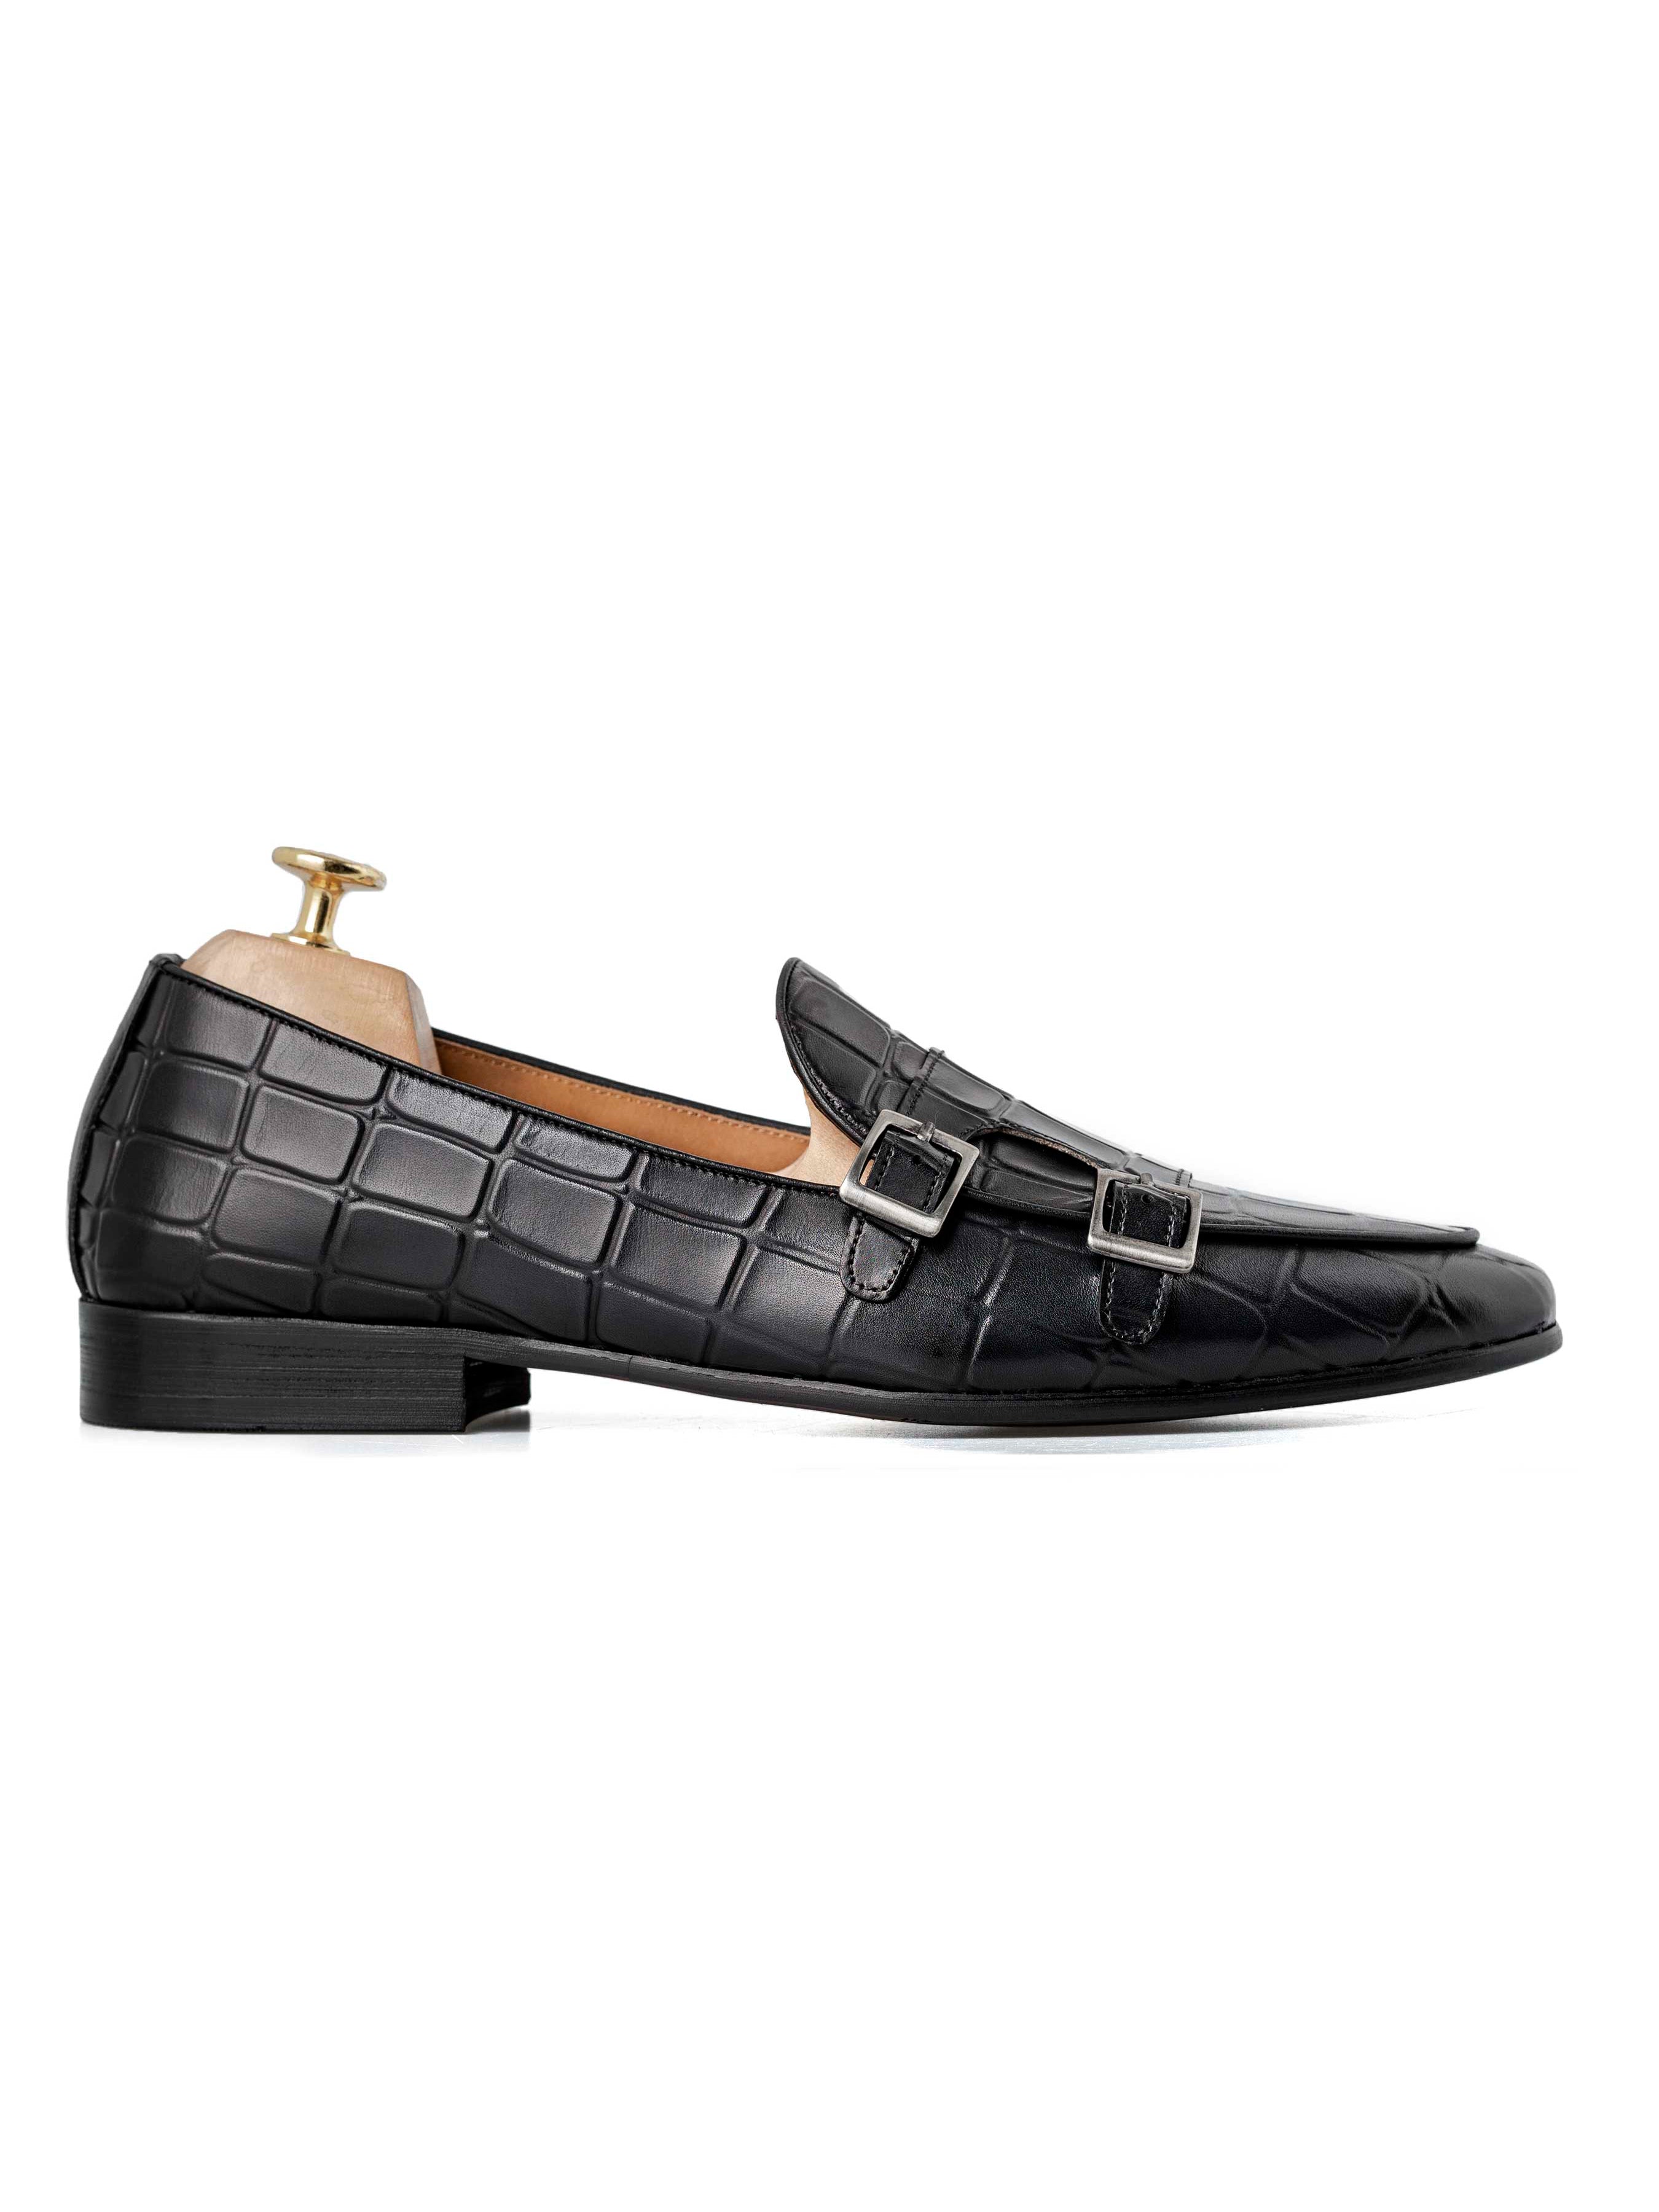 Belgian Loafer - Black Grey Croco Double Monk Strap (Hand Painted Patina)